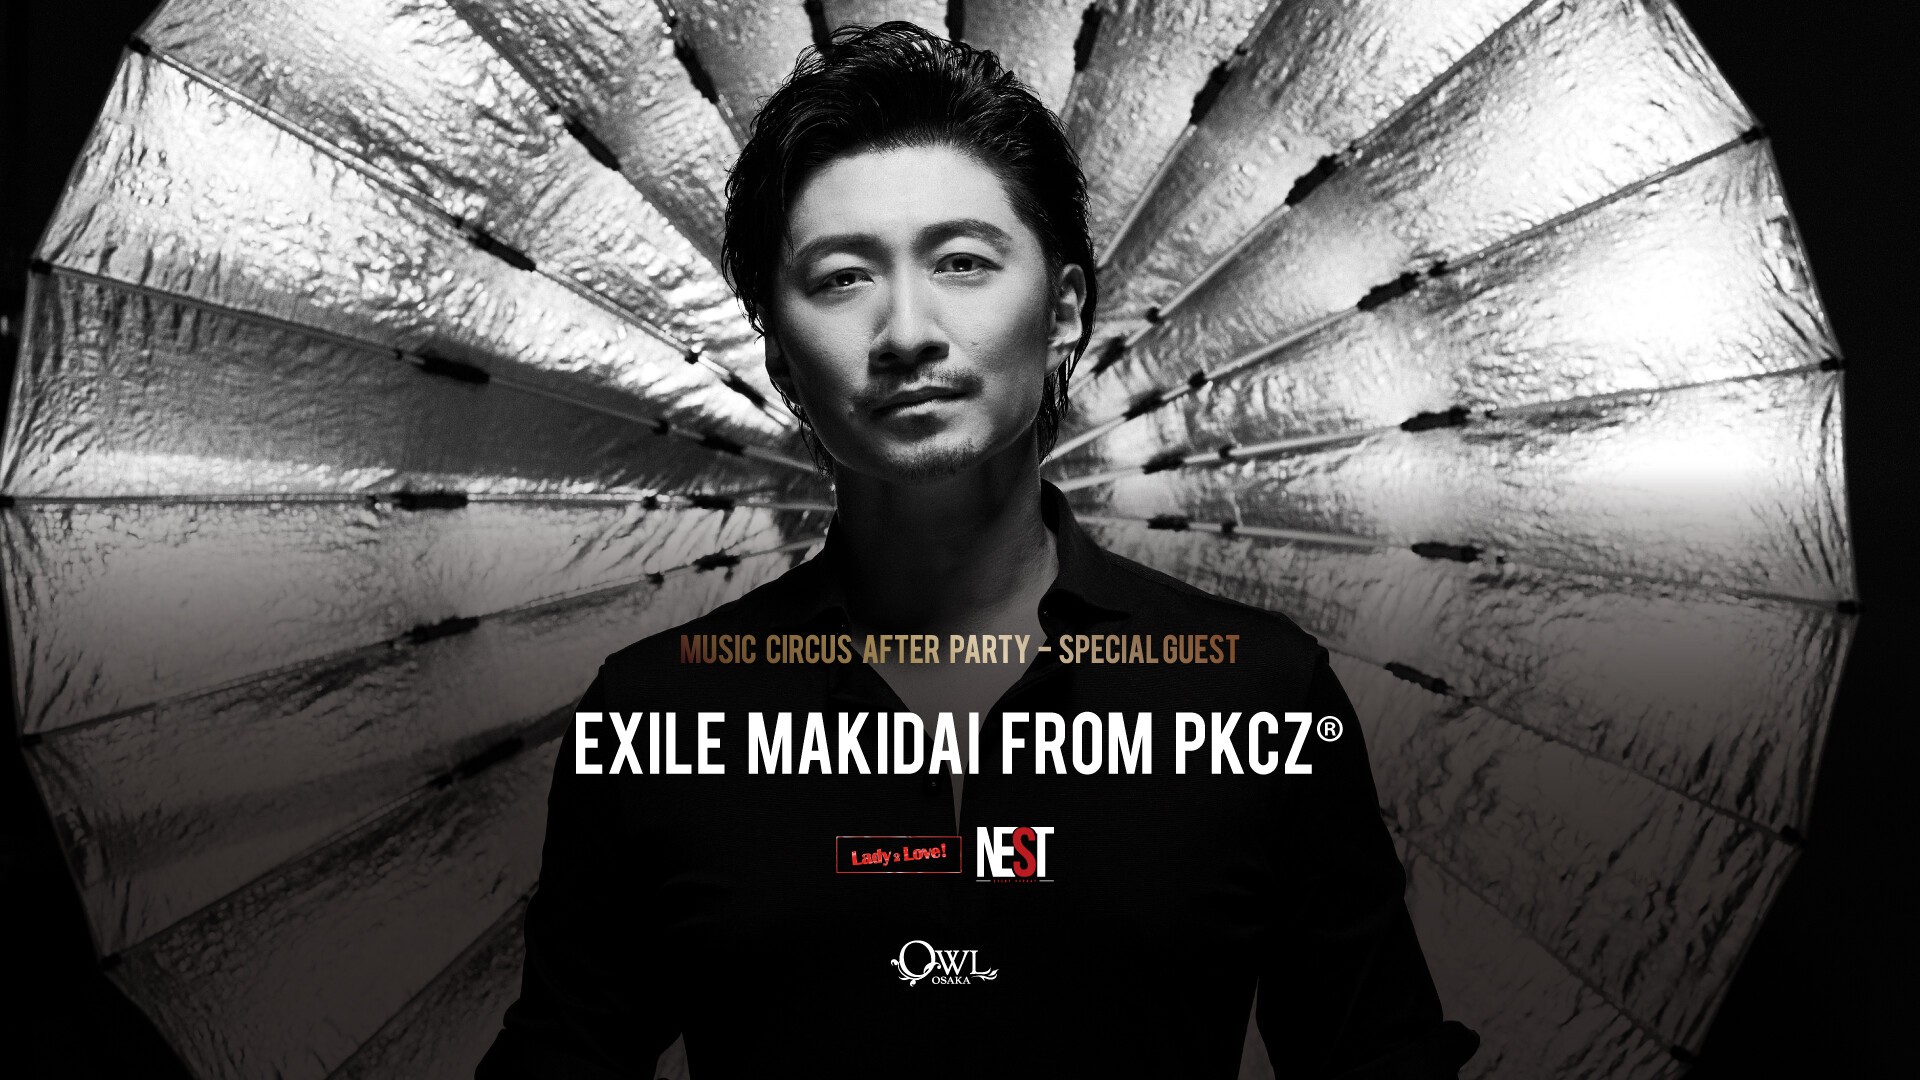 Iflyer Music Circus After Party Special Guest Exile Makidai From Pkcz Owl 大阪府